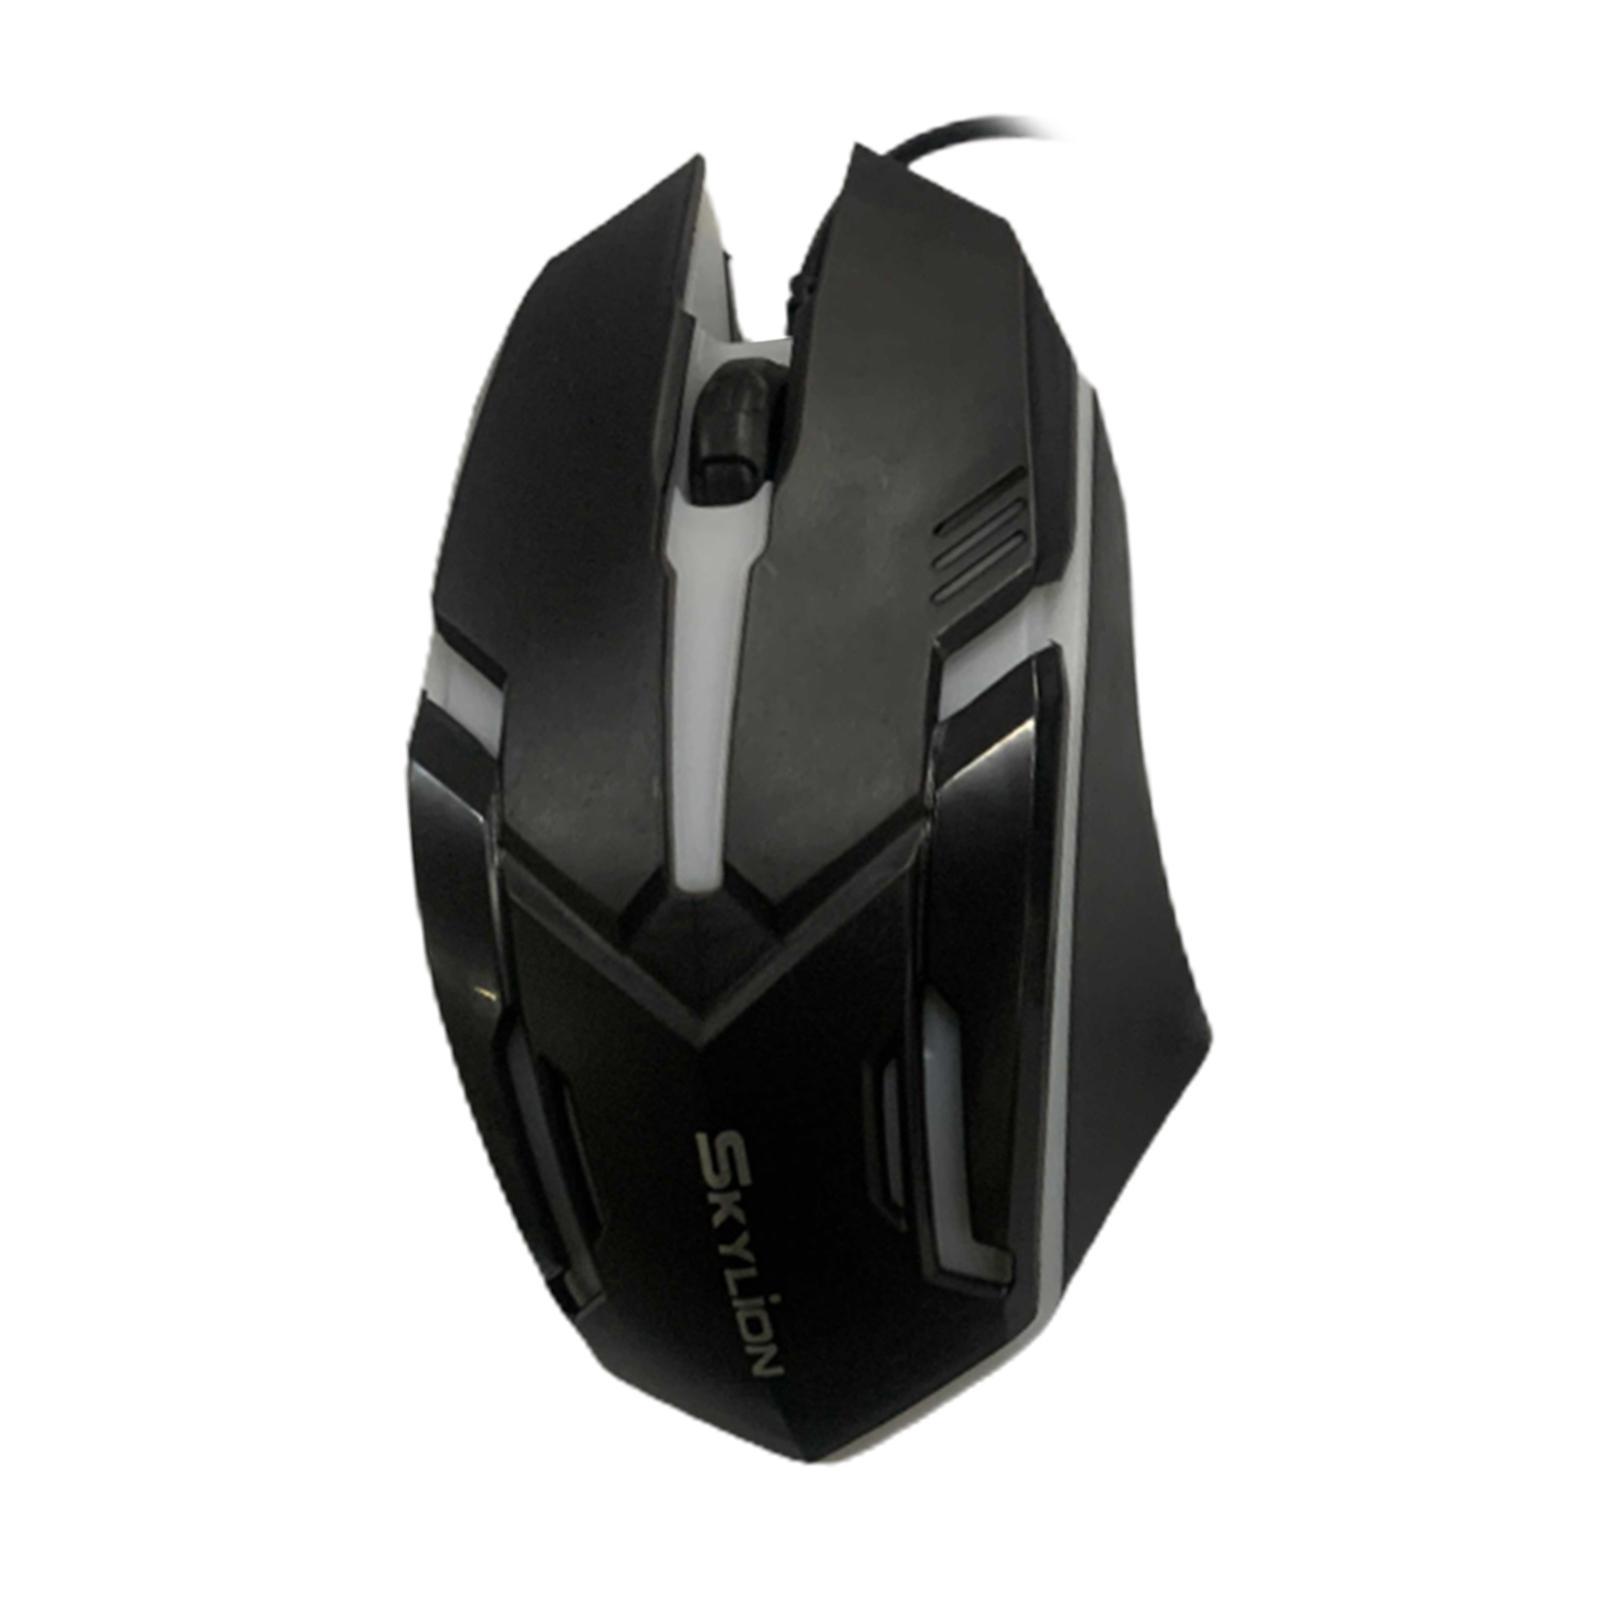 Gaming Wired 1600 DPI Computer Mice Laptop for Windows 7/8/10/XP Vista